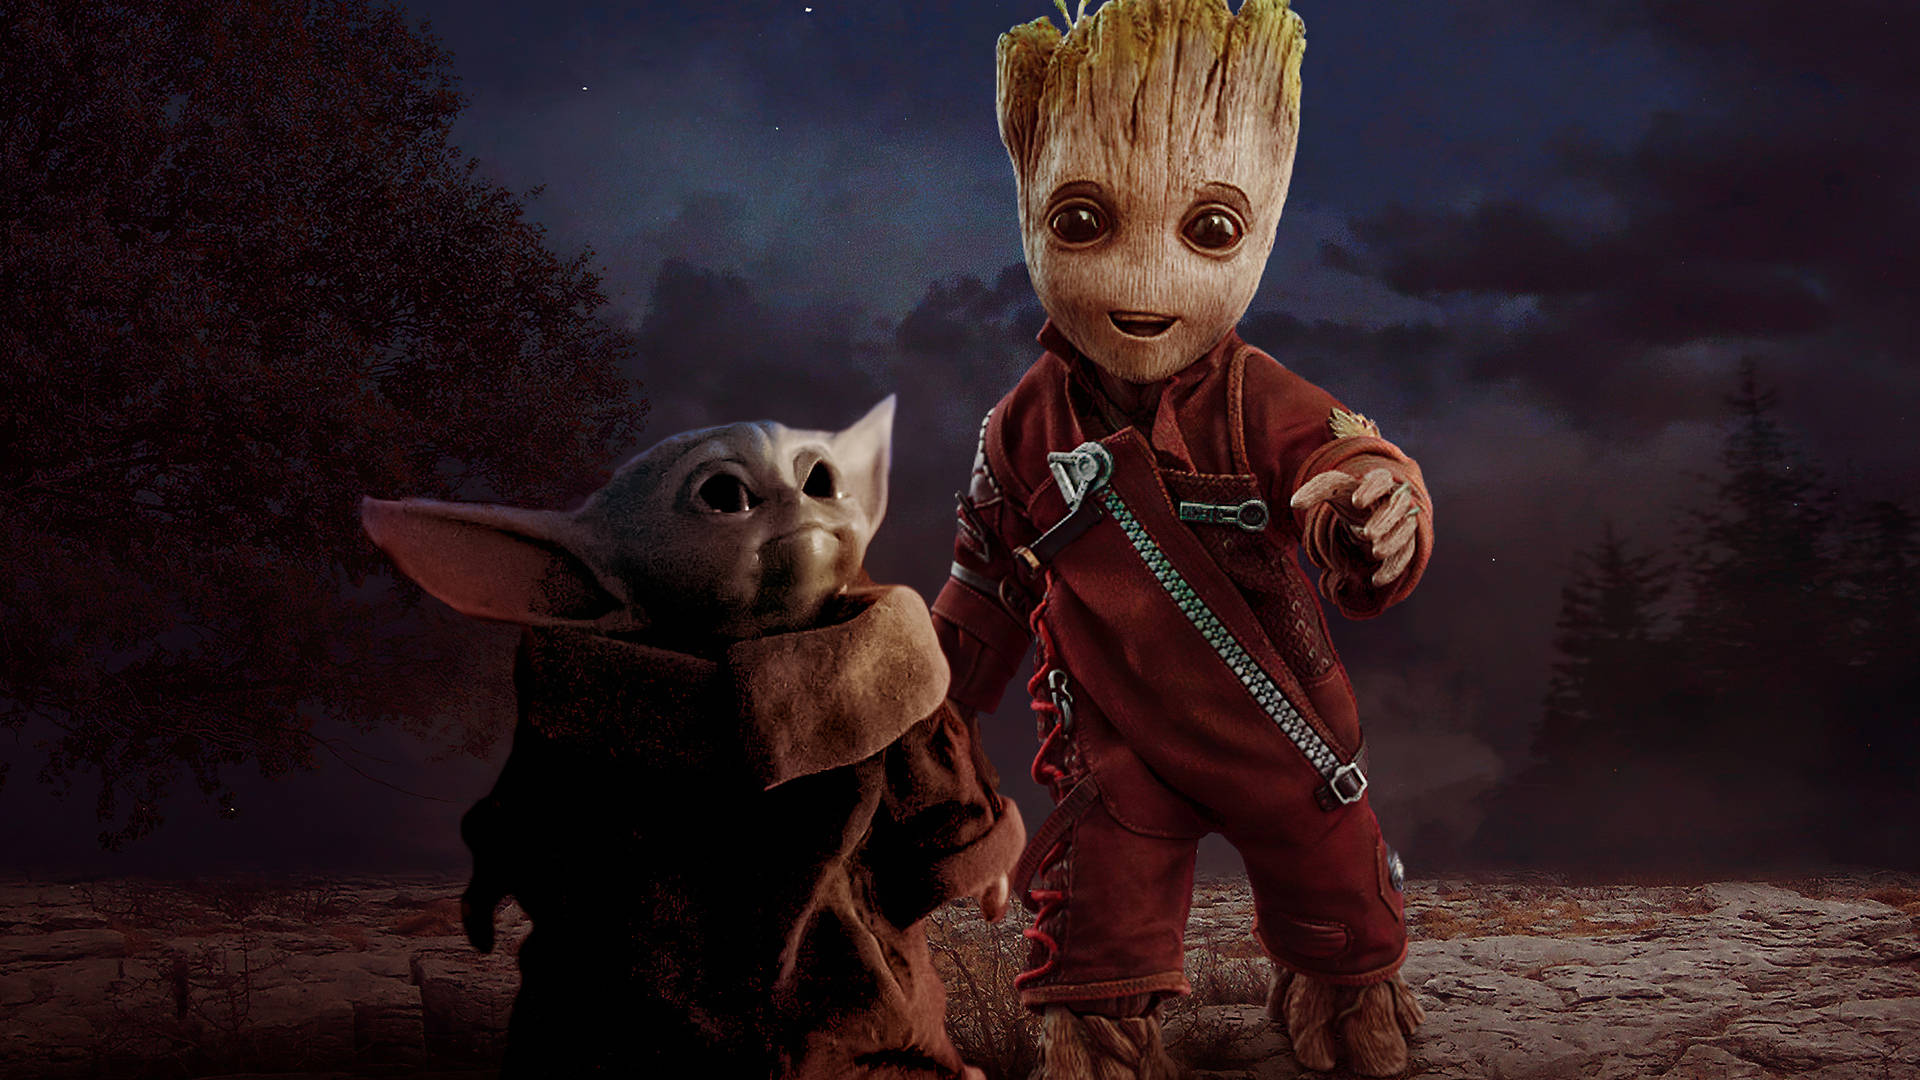 Cool Pictures Groot And Yoda